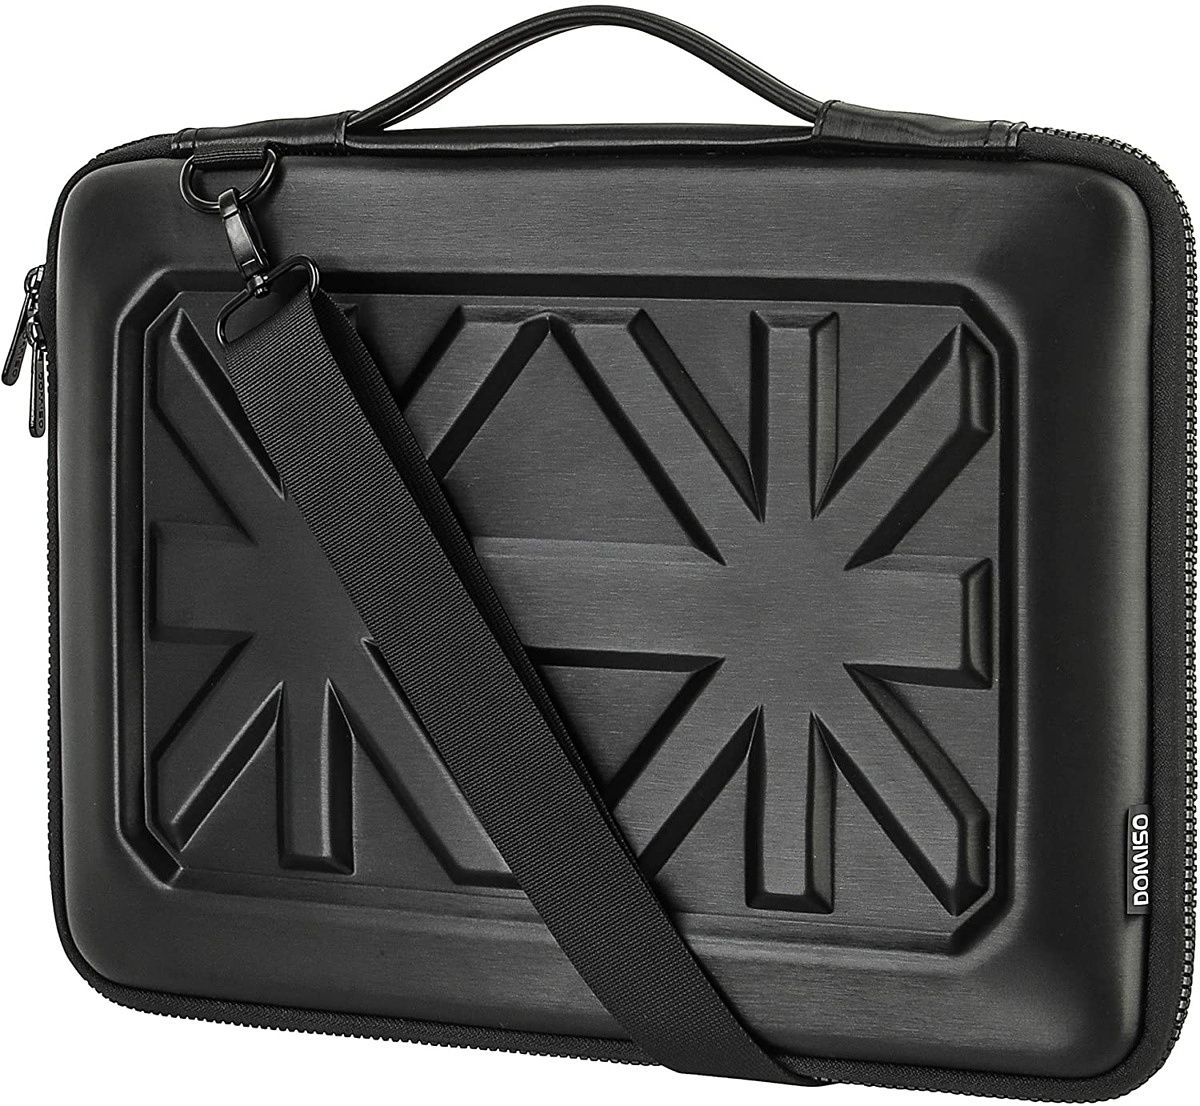 If you want a bit of extra protection, the hard shell of the DOMISO laptop case will almost certainly keep your Dell XPS 13 safe from bumps and even some drops.